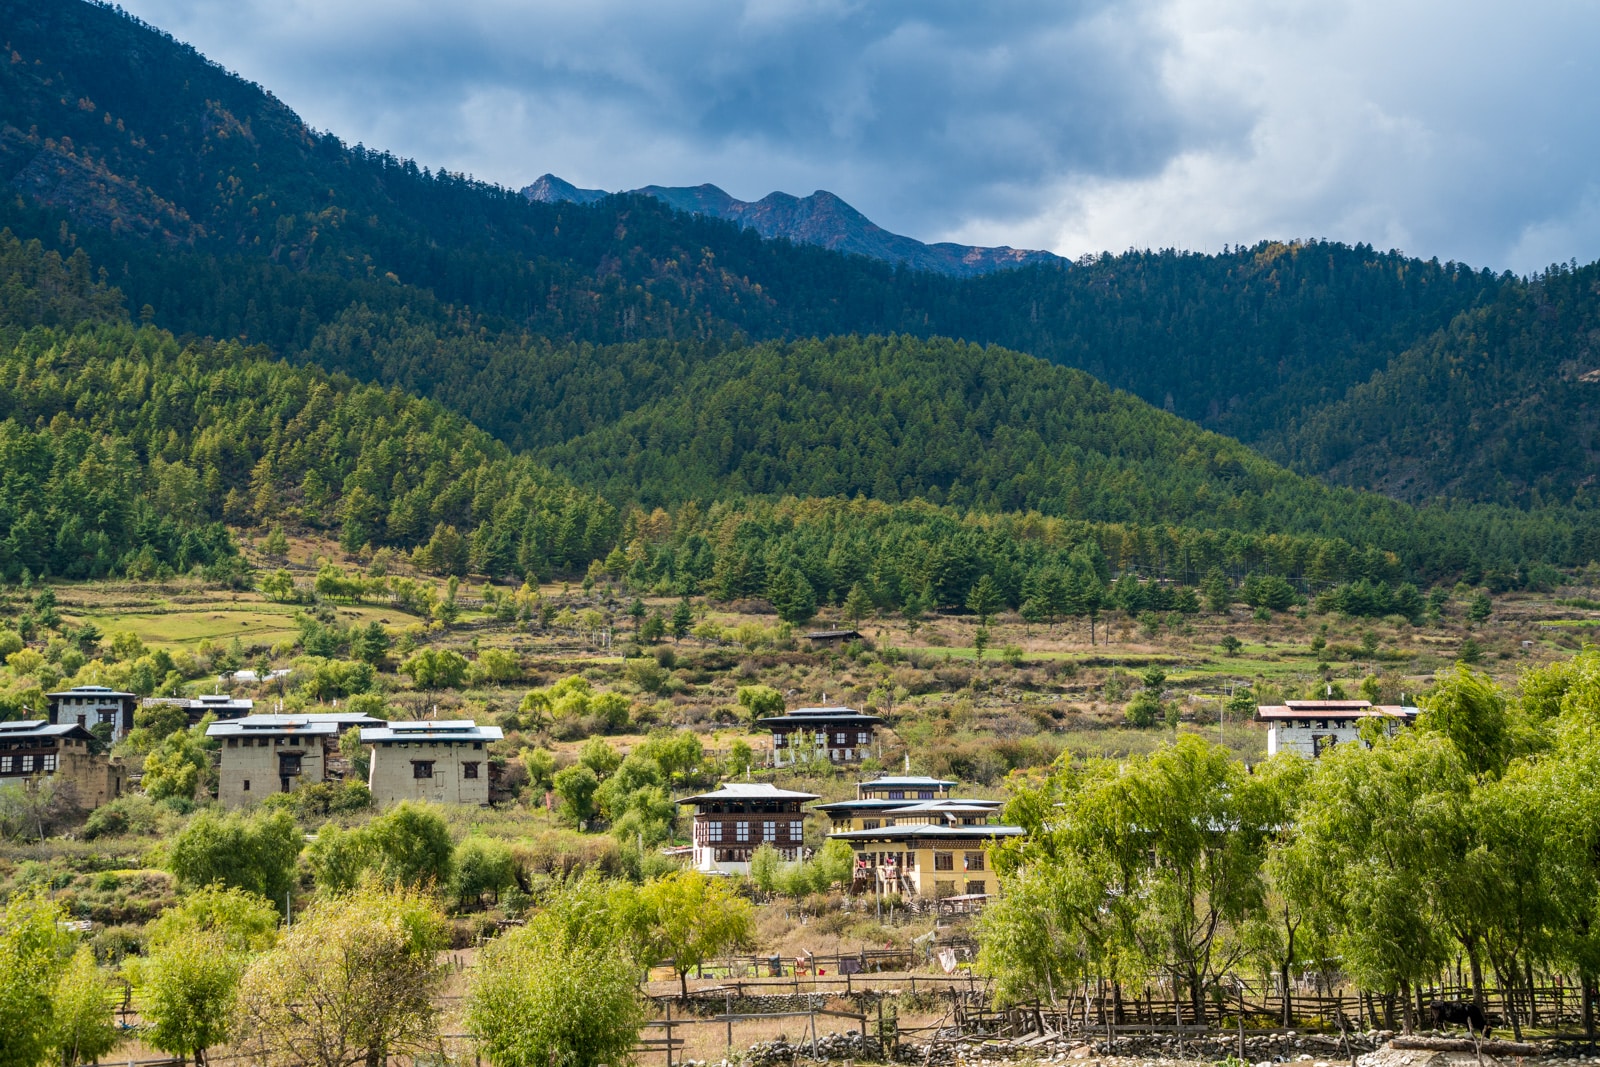 Off the beaten track Bhutan - Haa Valley houses - Lost With Purpose travel blog